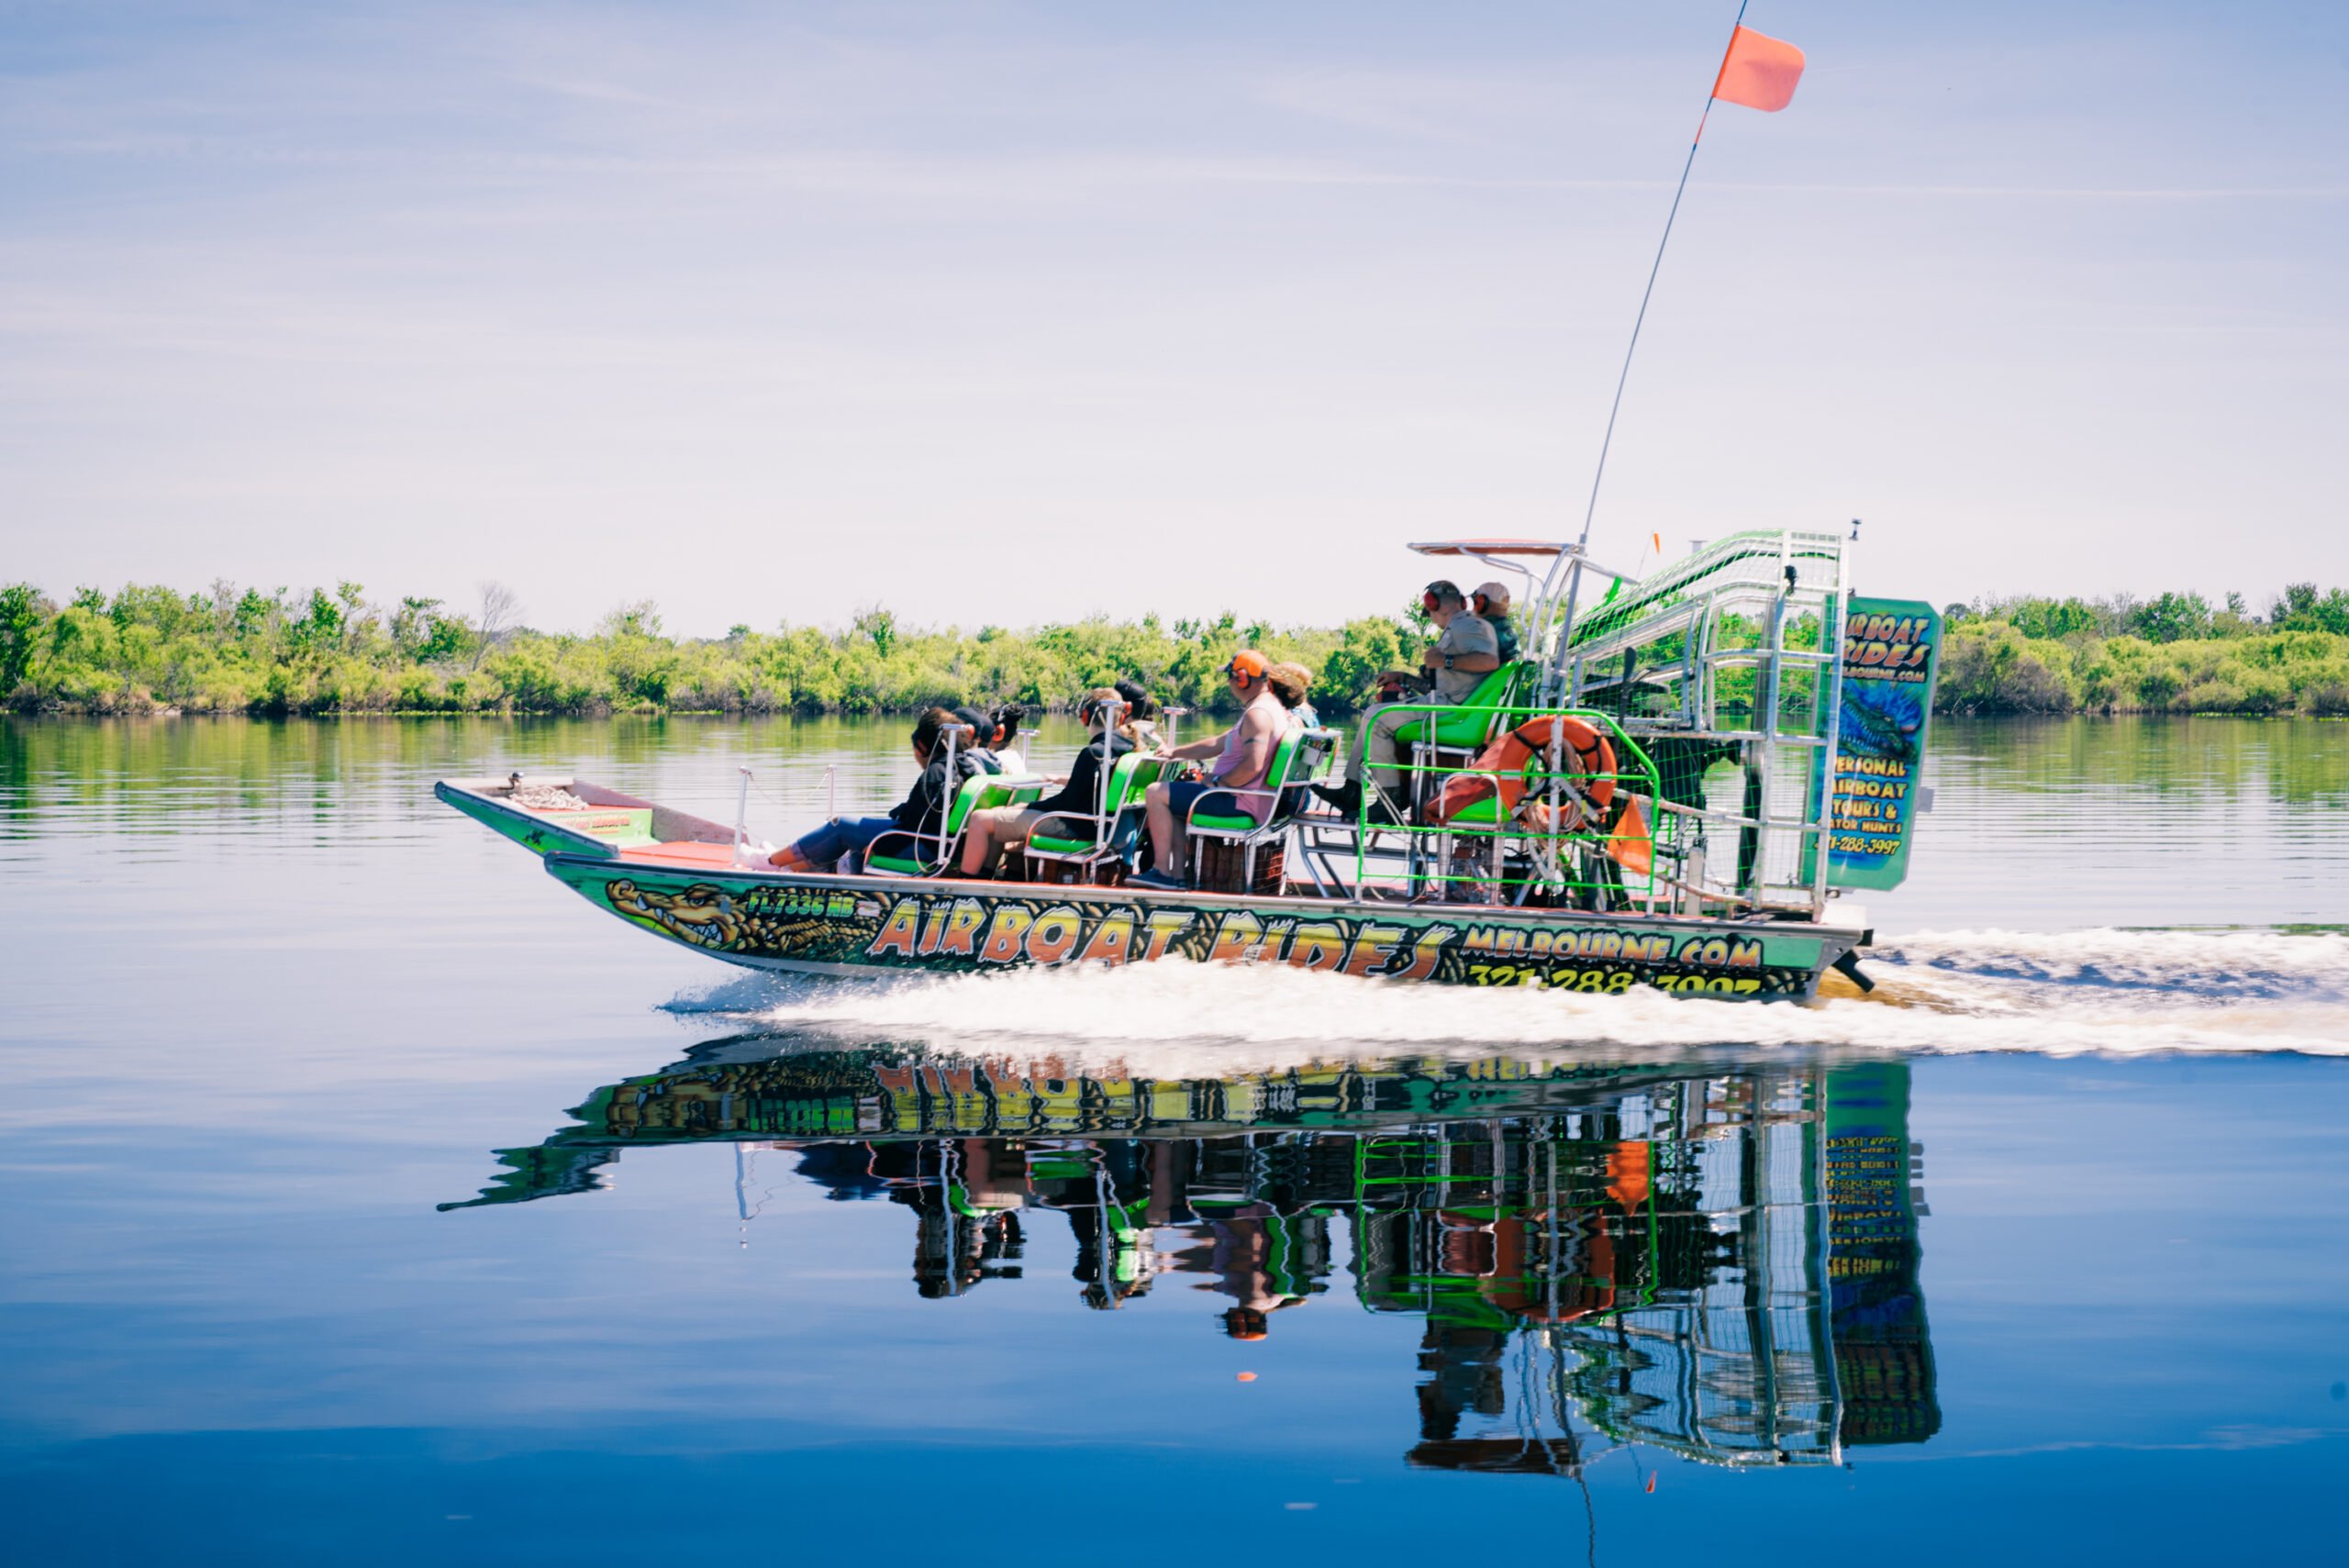 Airboat tours on Florida's Space Coast